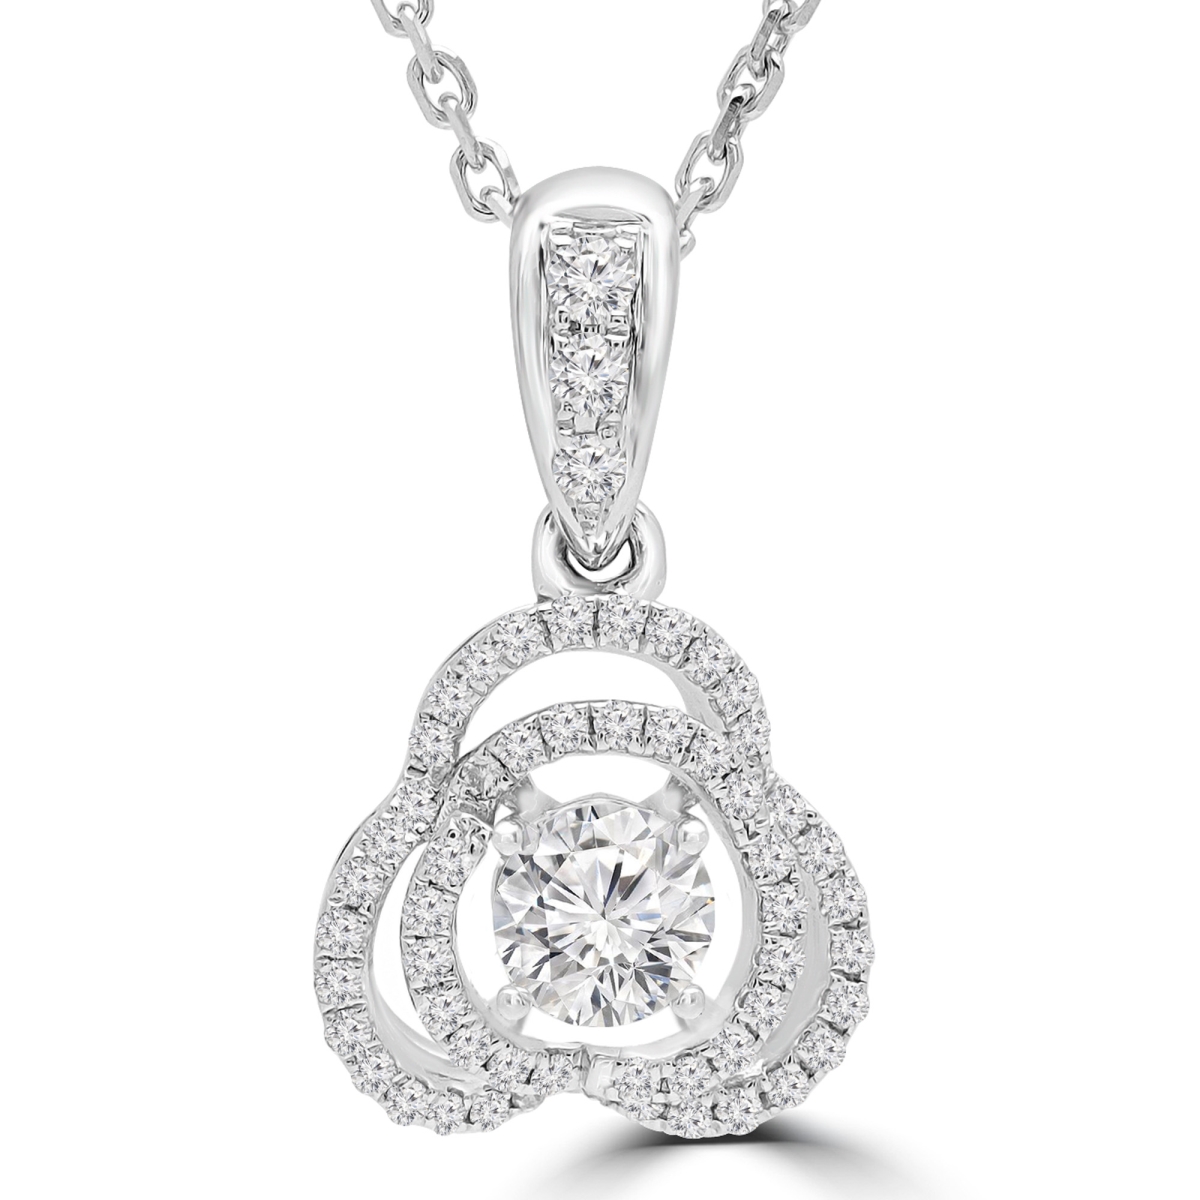 Md190524 0.4 Ctw Round Diamond Halo Pendant Necklace In 18k White Gold